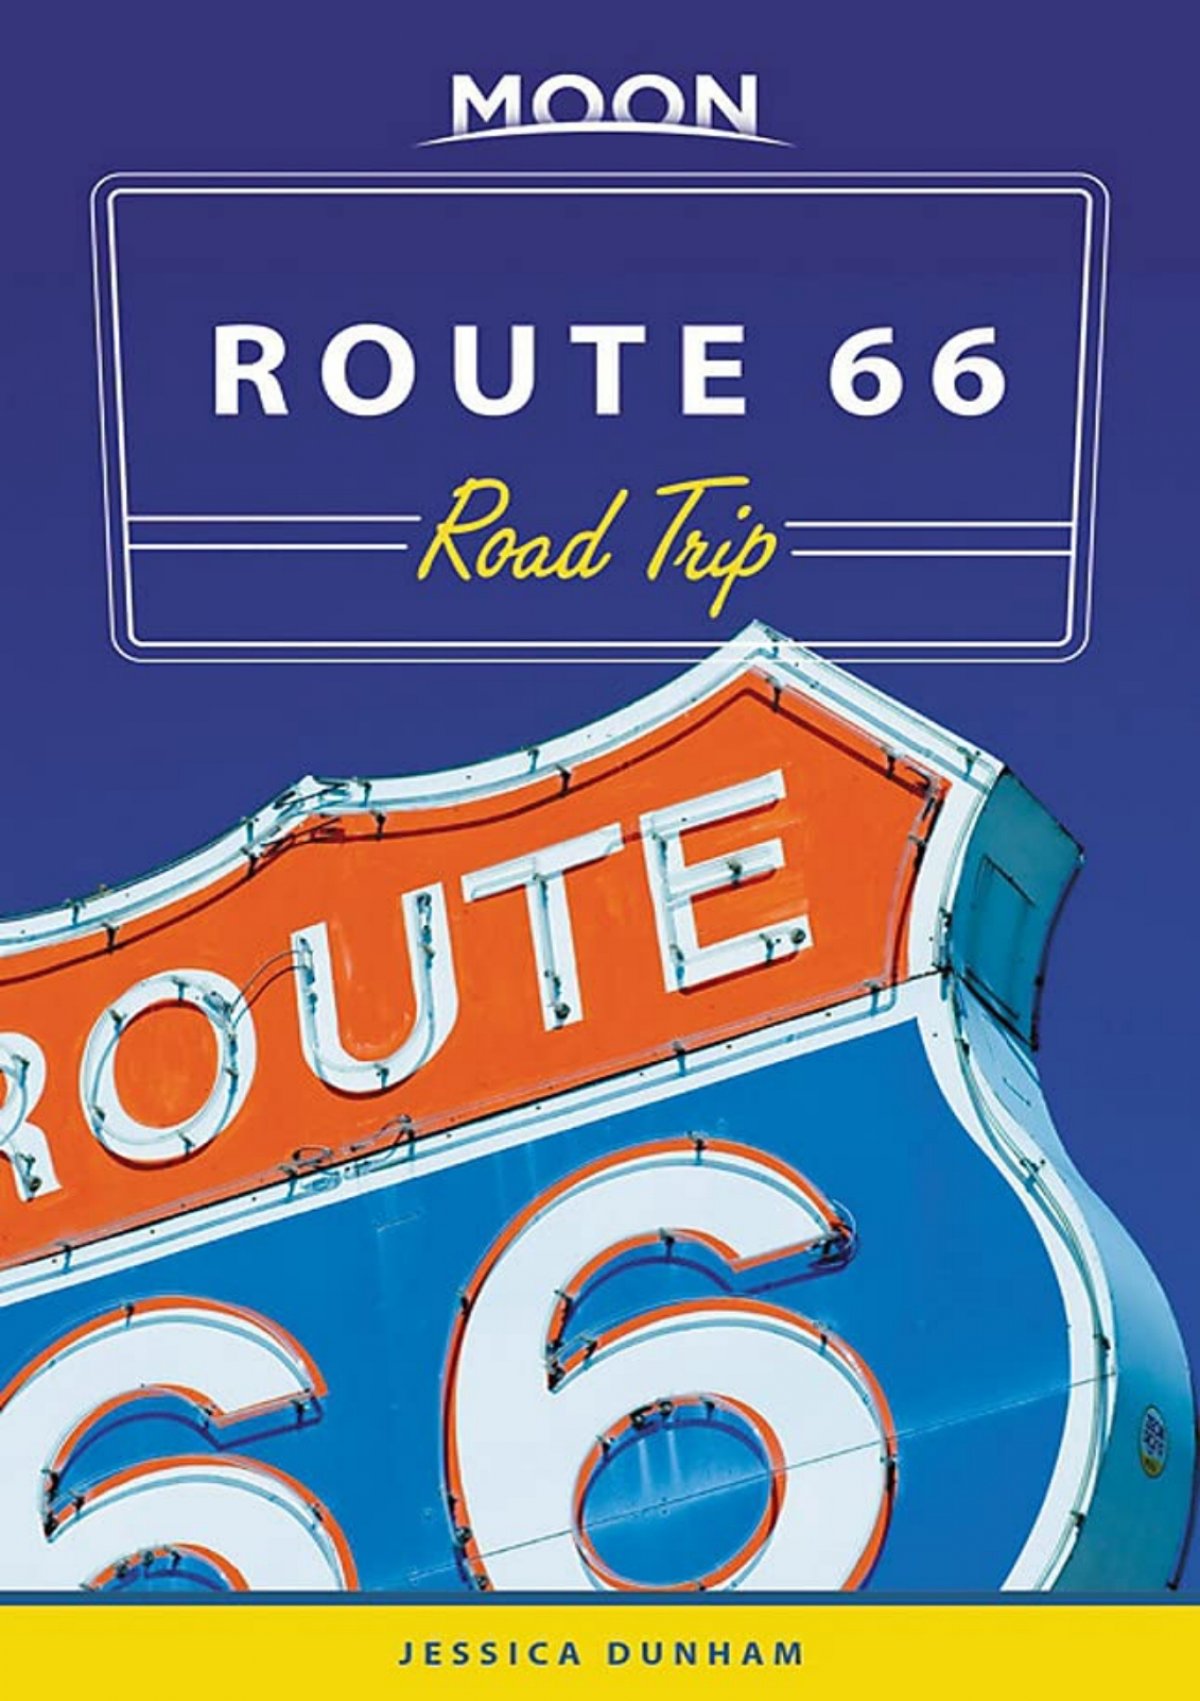 route 66 travel guide pdf